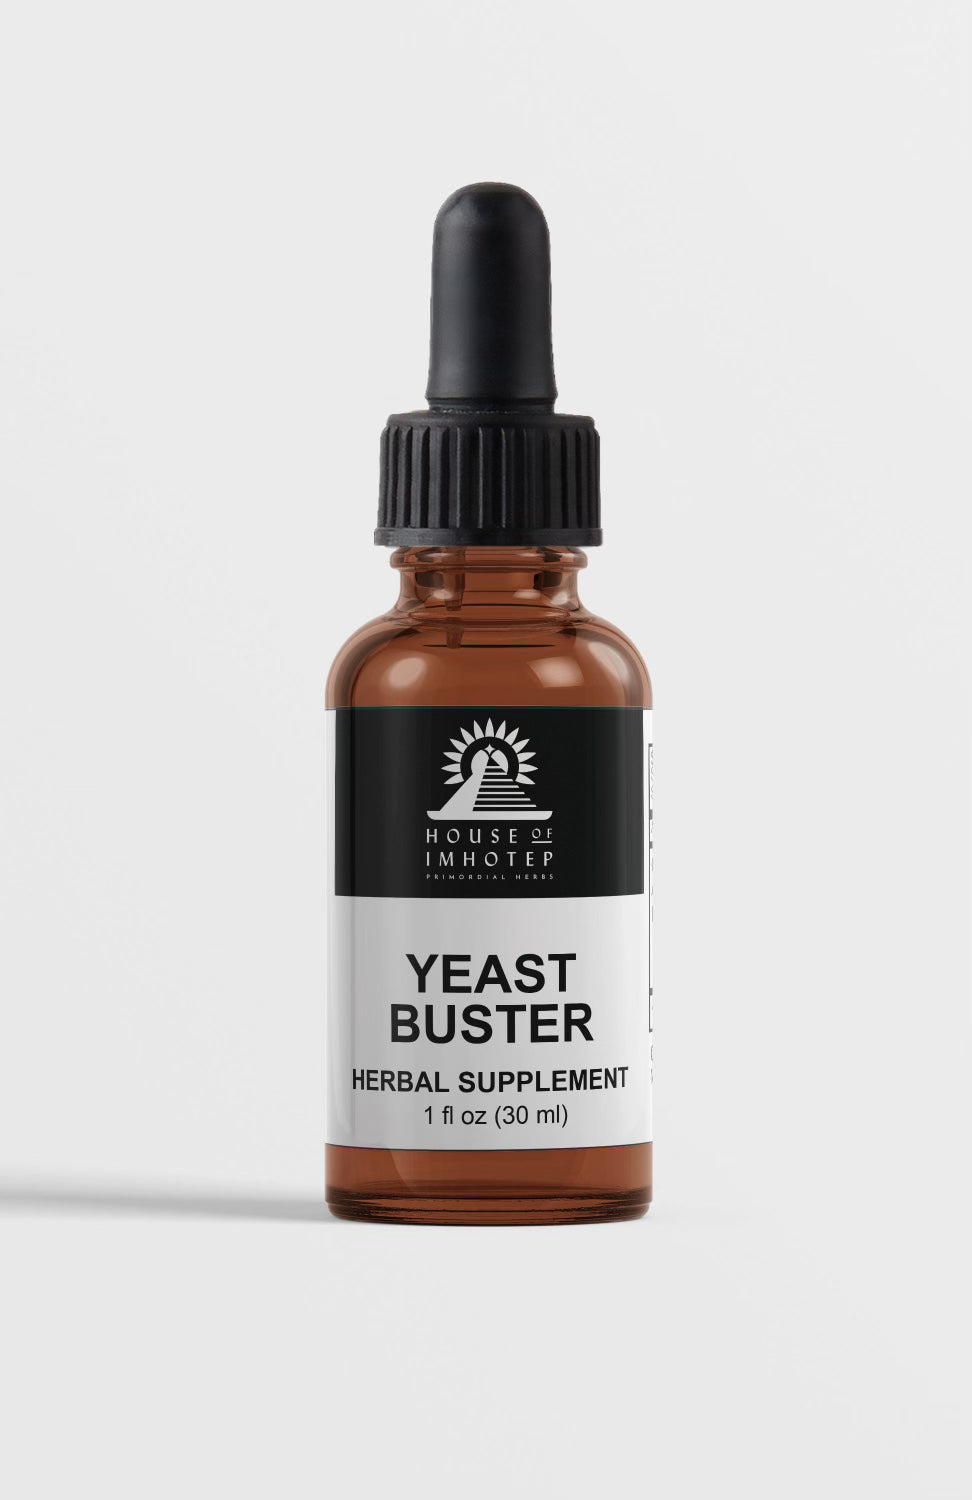 YEAST BUSTER